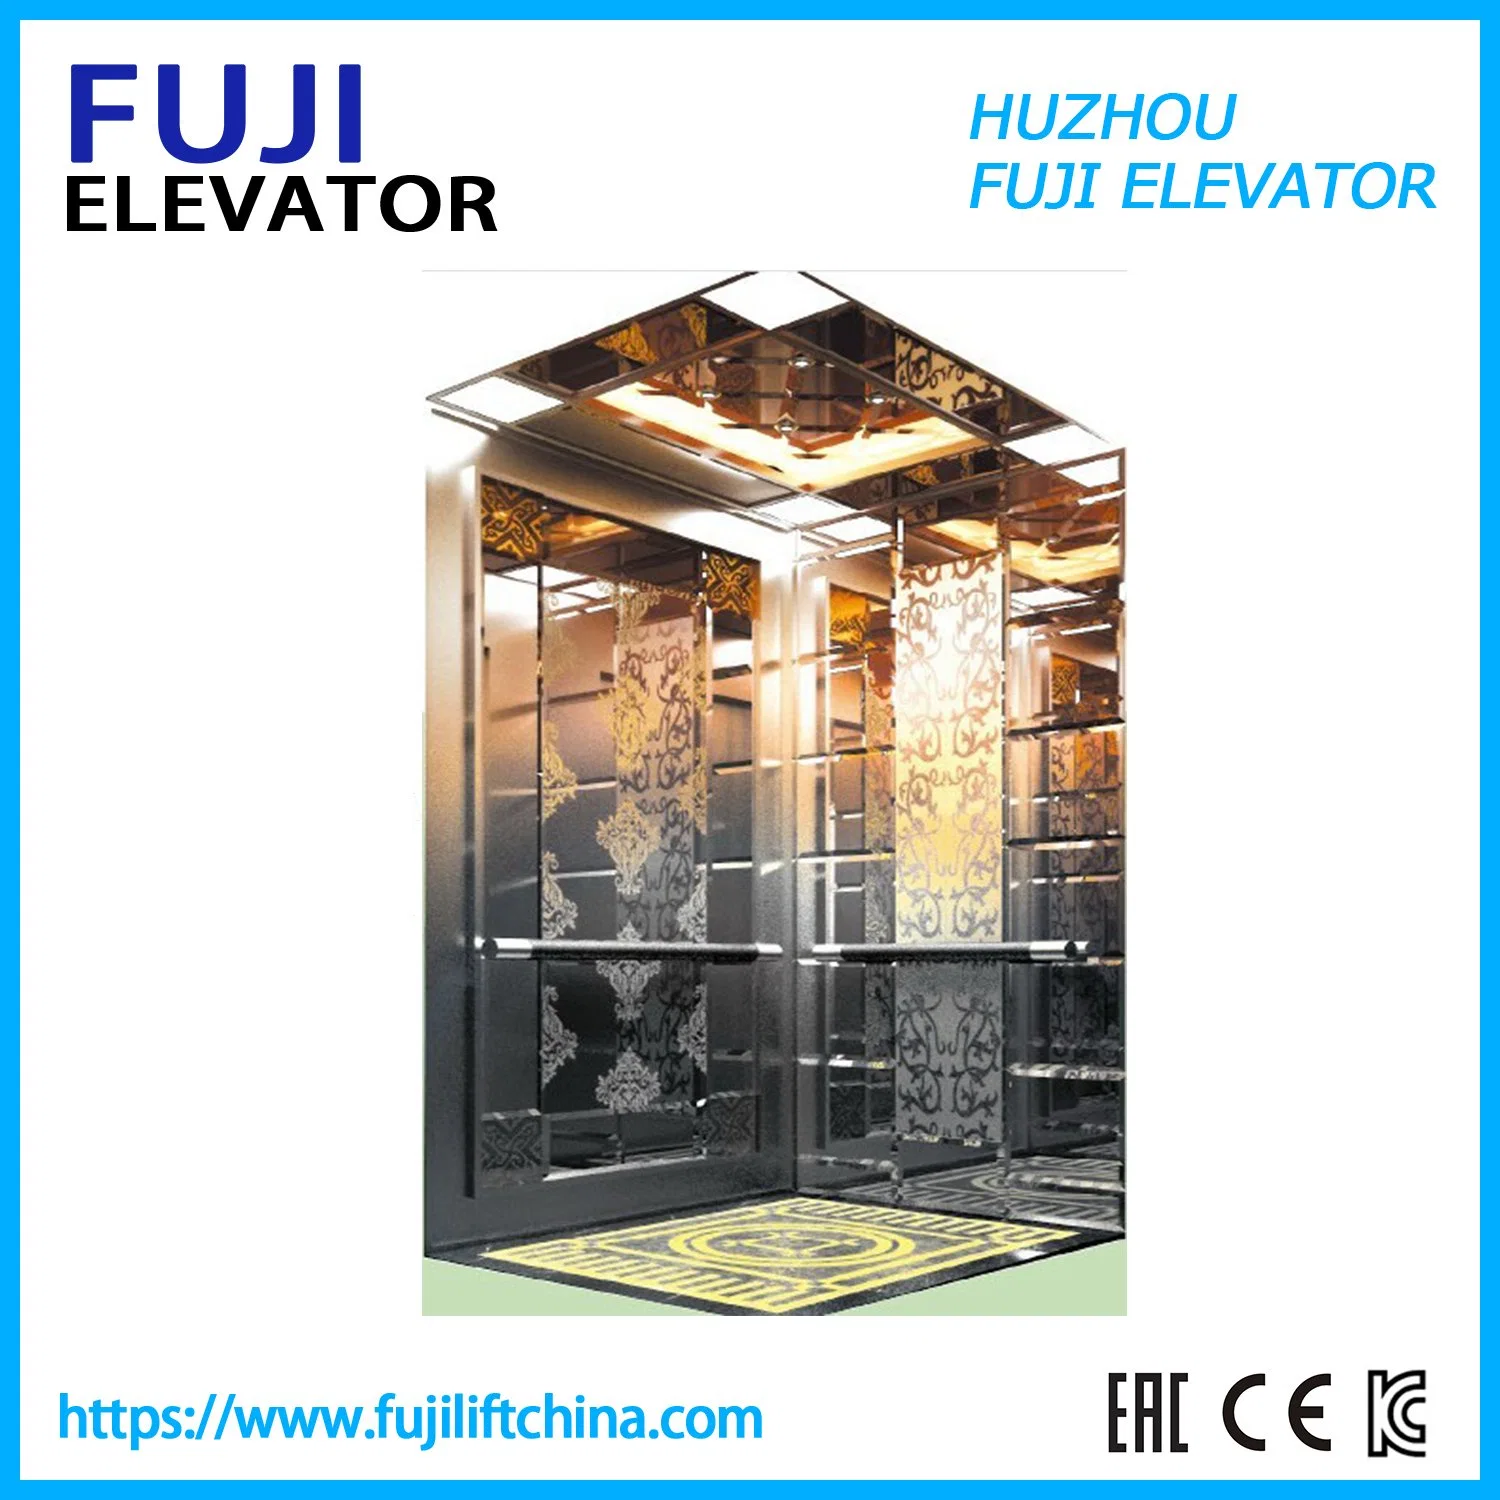 Outdoor Freight Electric Hydraulic Mall Passenger Elevator Building Panoramic Lift for Machine Roomless